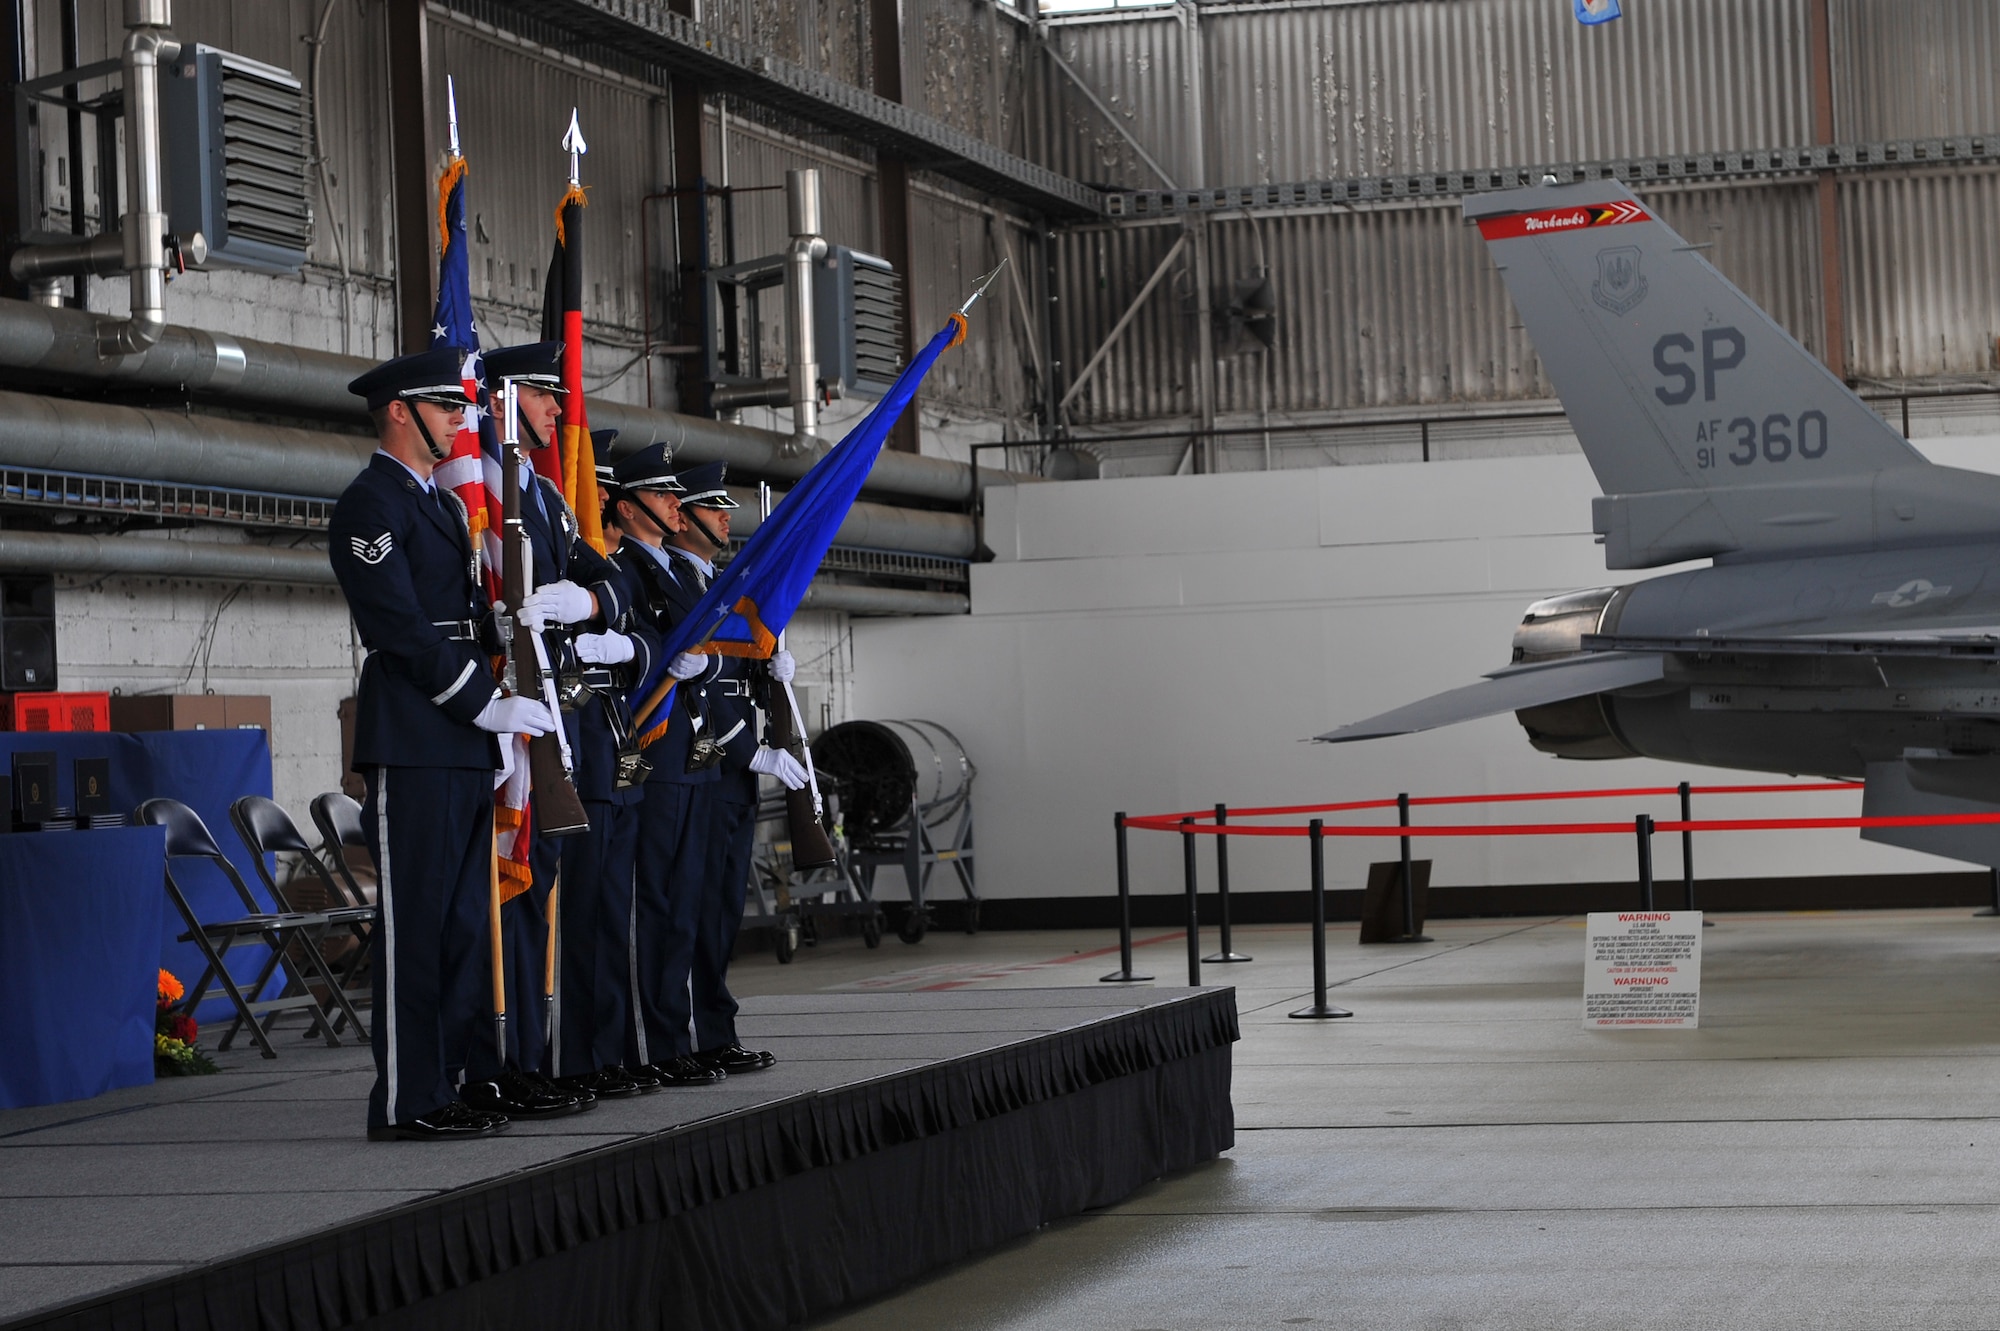 SPANGDAHLEM AIR BASE, Germany – Members of the 52nd Fighter Wing Honor Guard post the colors during the Bitburg High School graduation ceremony inside Hangar 1 here June 9. The class of 2012 consisted of 54 students. More than 300 family members and guests attended the ceremony to celebrate the completion of their high school education. (U.S. Air Force photo by Airman 1st Class Dillon Davis/Released)